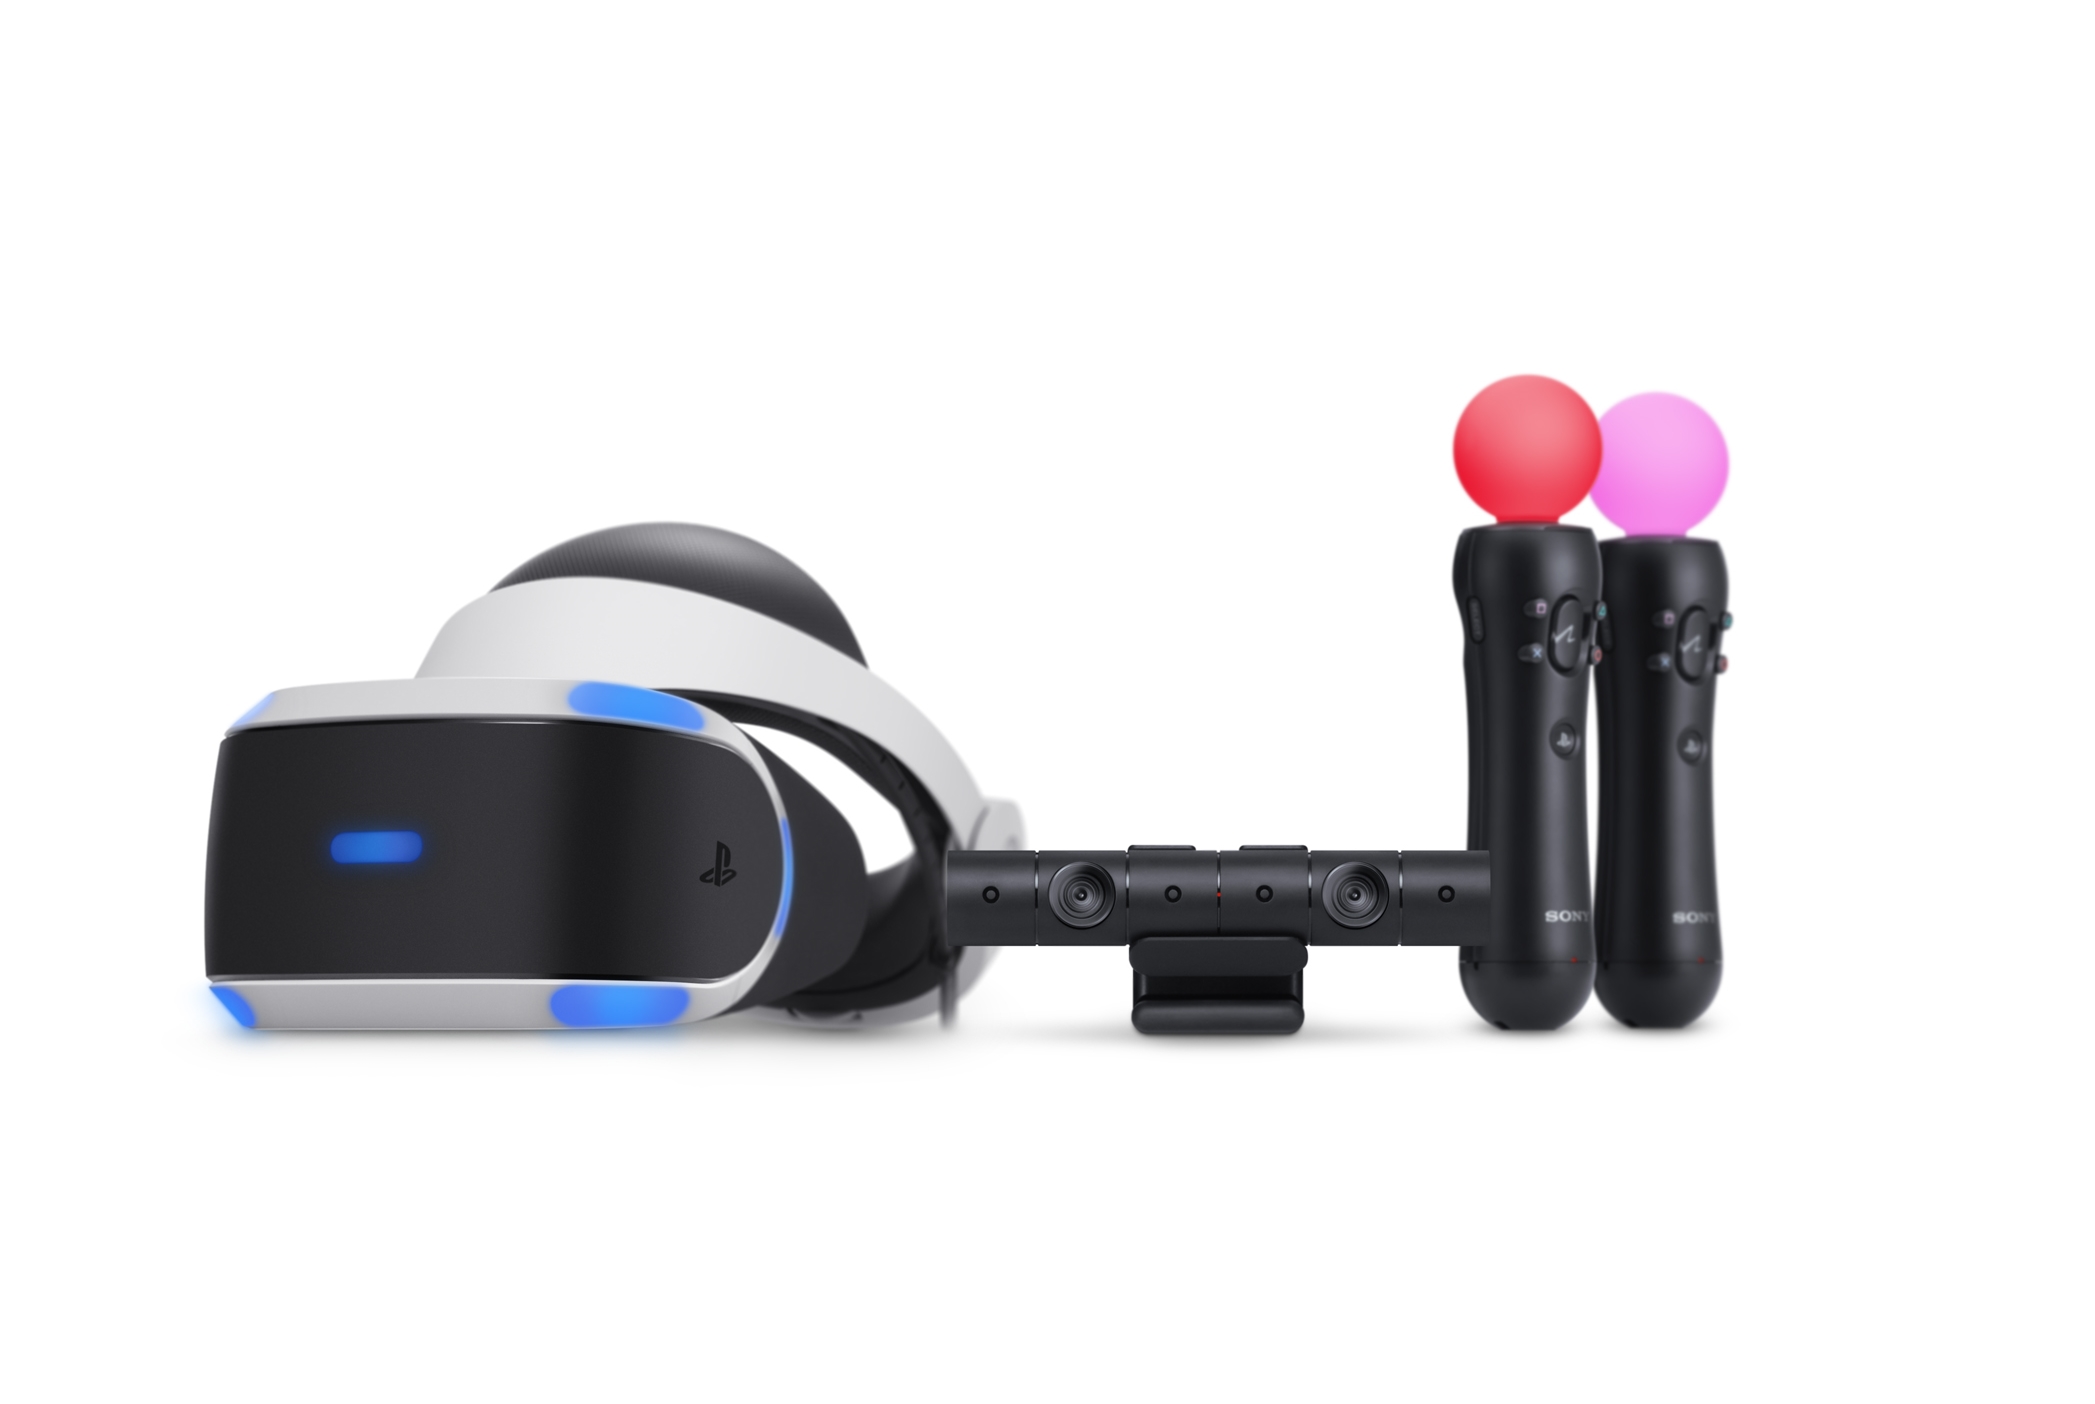 PS5 will get new PSVR headset at launch, according to one VR